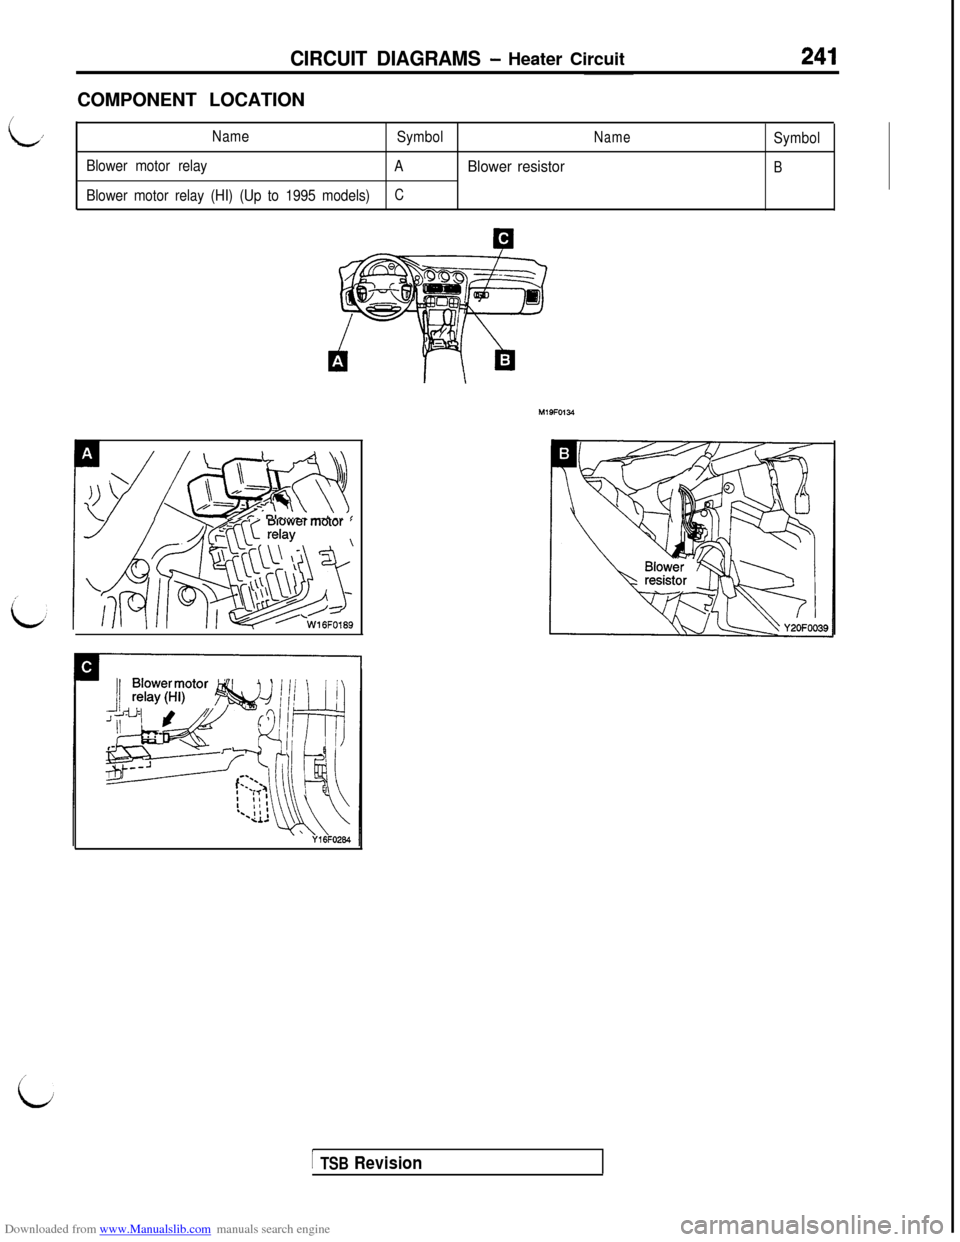 MITSUBISHI 3000GT 1996 2.G Workshop Manual Downloaded from www.Manualslib.com manuals search engine CIRCUIT DIAGRAMS - Heater CircuitCOMPONENT LOCATION
,Name
SymbolNameSymbol
Blower motor relay
A
Blower resistorB
Blower motor relay (HI) (Up to